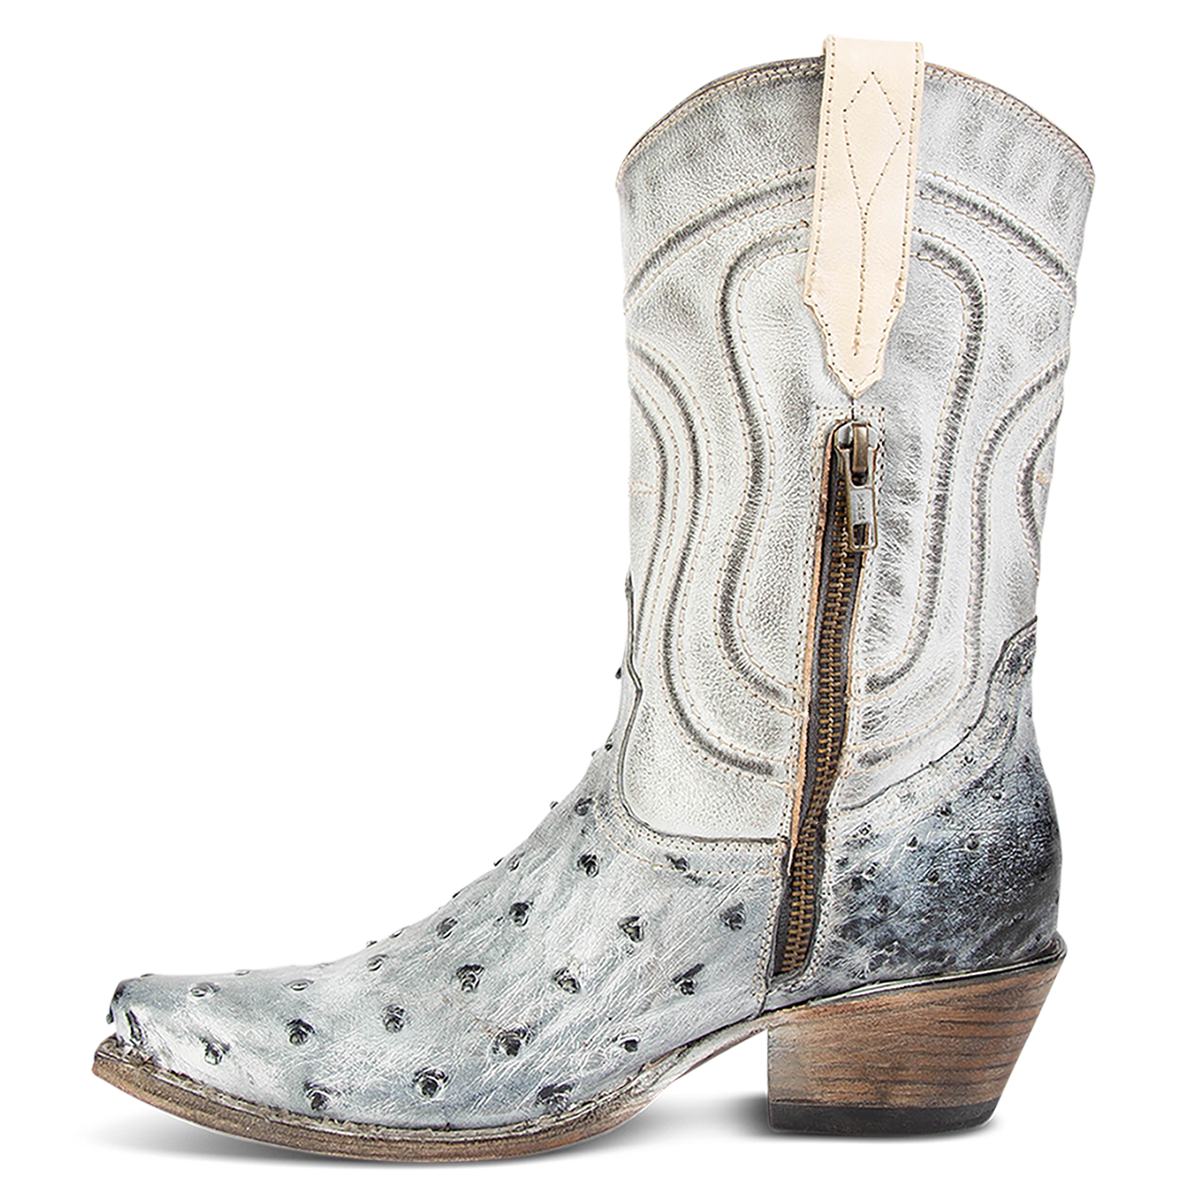 Inside view showing zip closure on FREEBIRD women's Weston ice ostrich multi exotic leather mid calf cowgirl mid calf boot